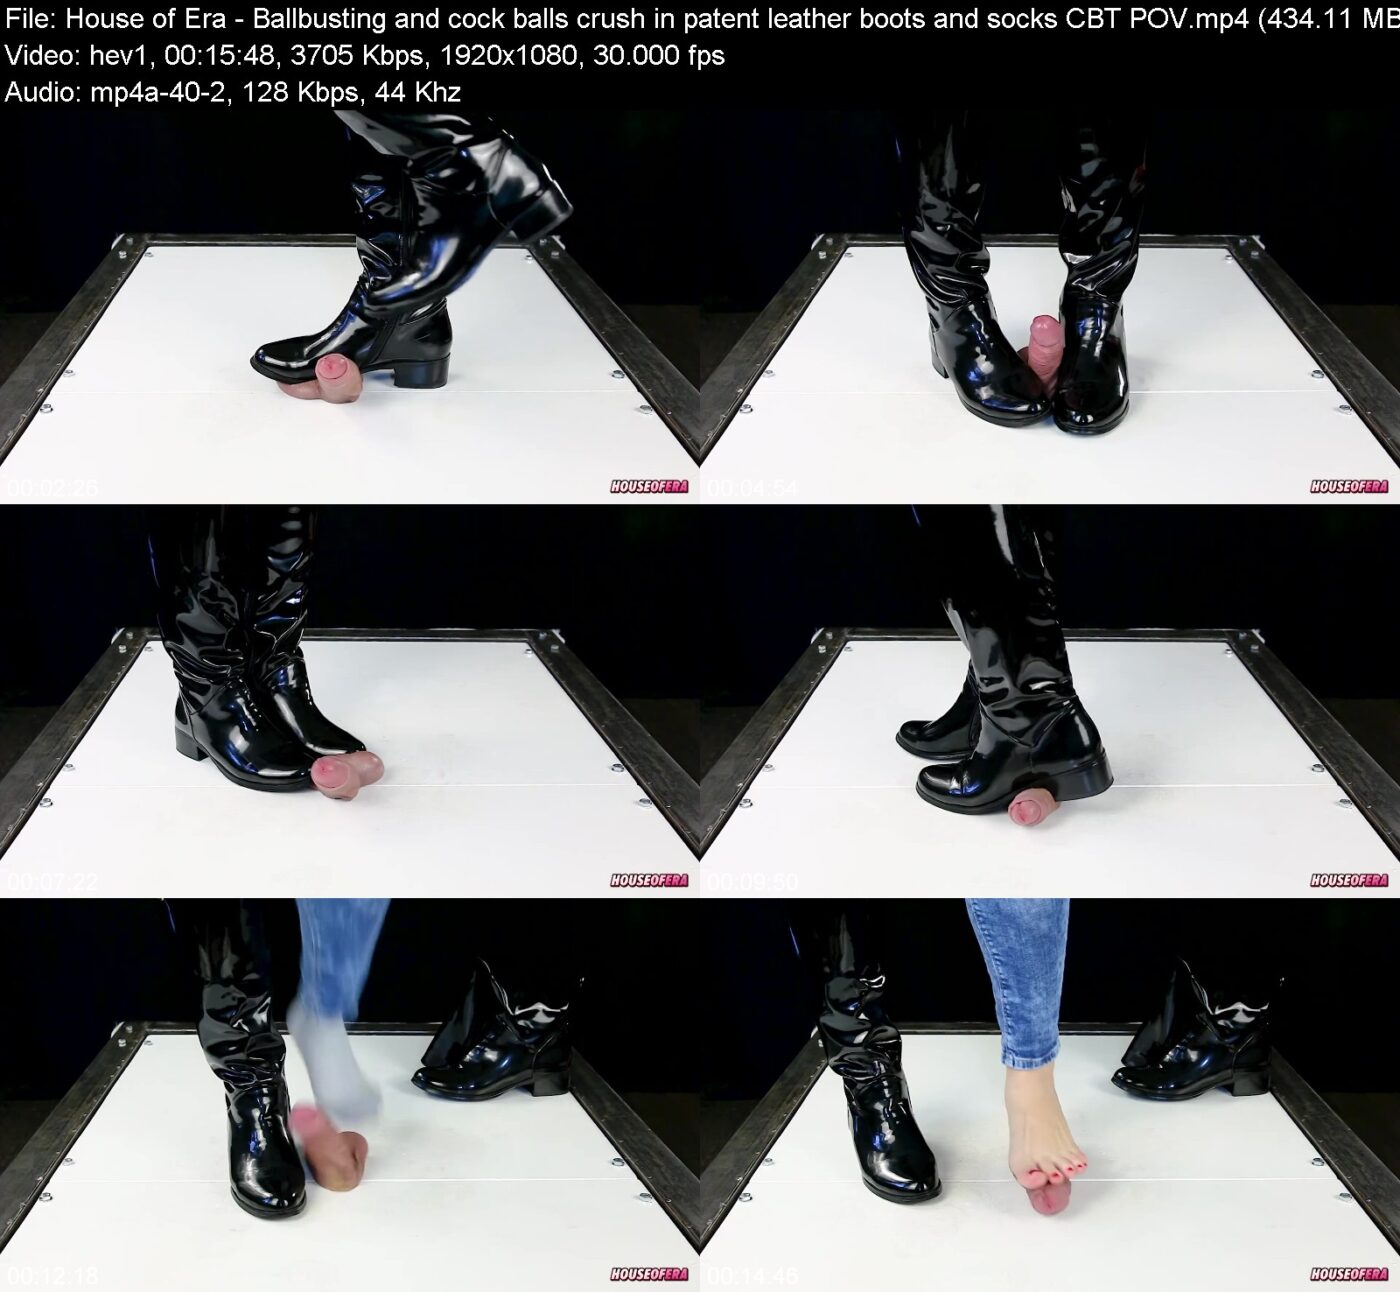 House of Era - Ballbusting and cock balls crush in patent leather boots and socks CBT POV